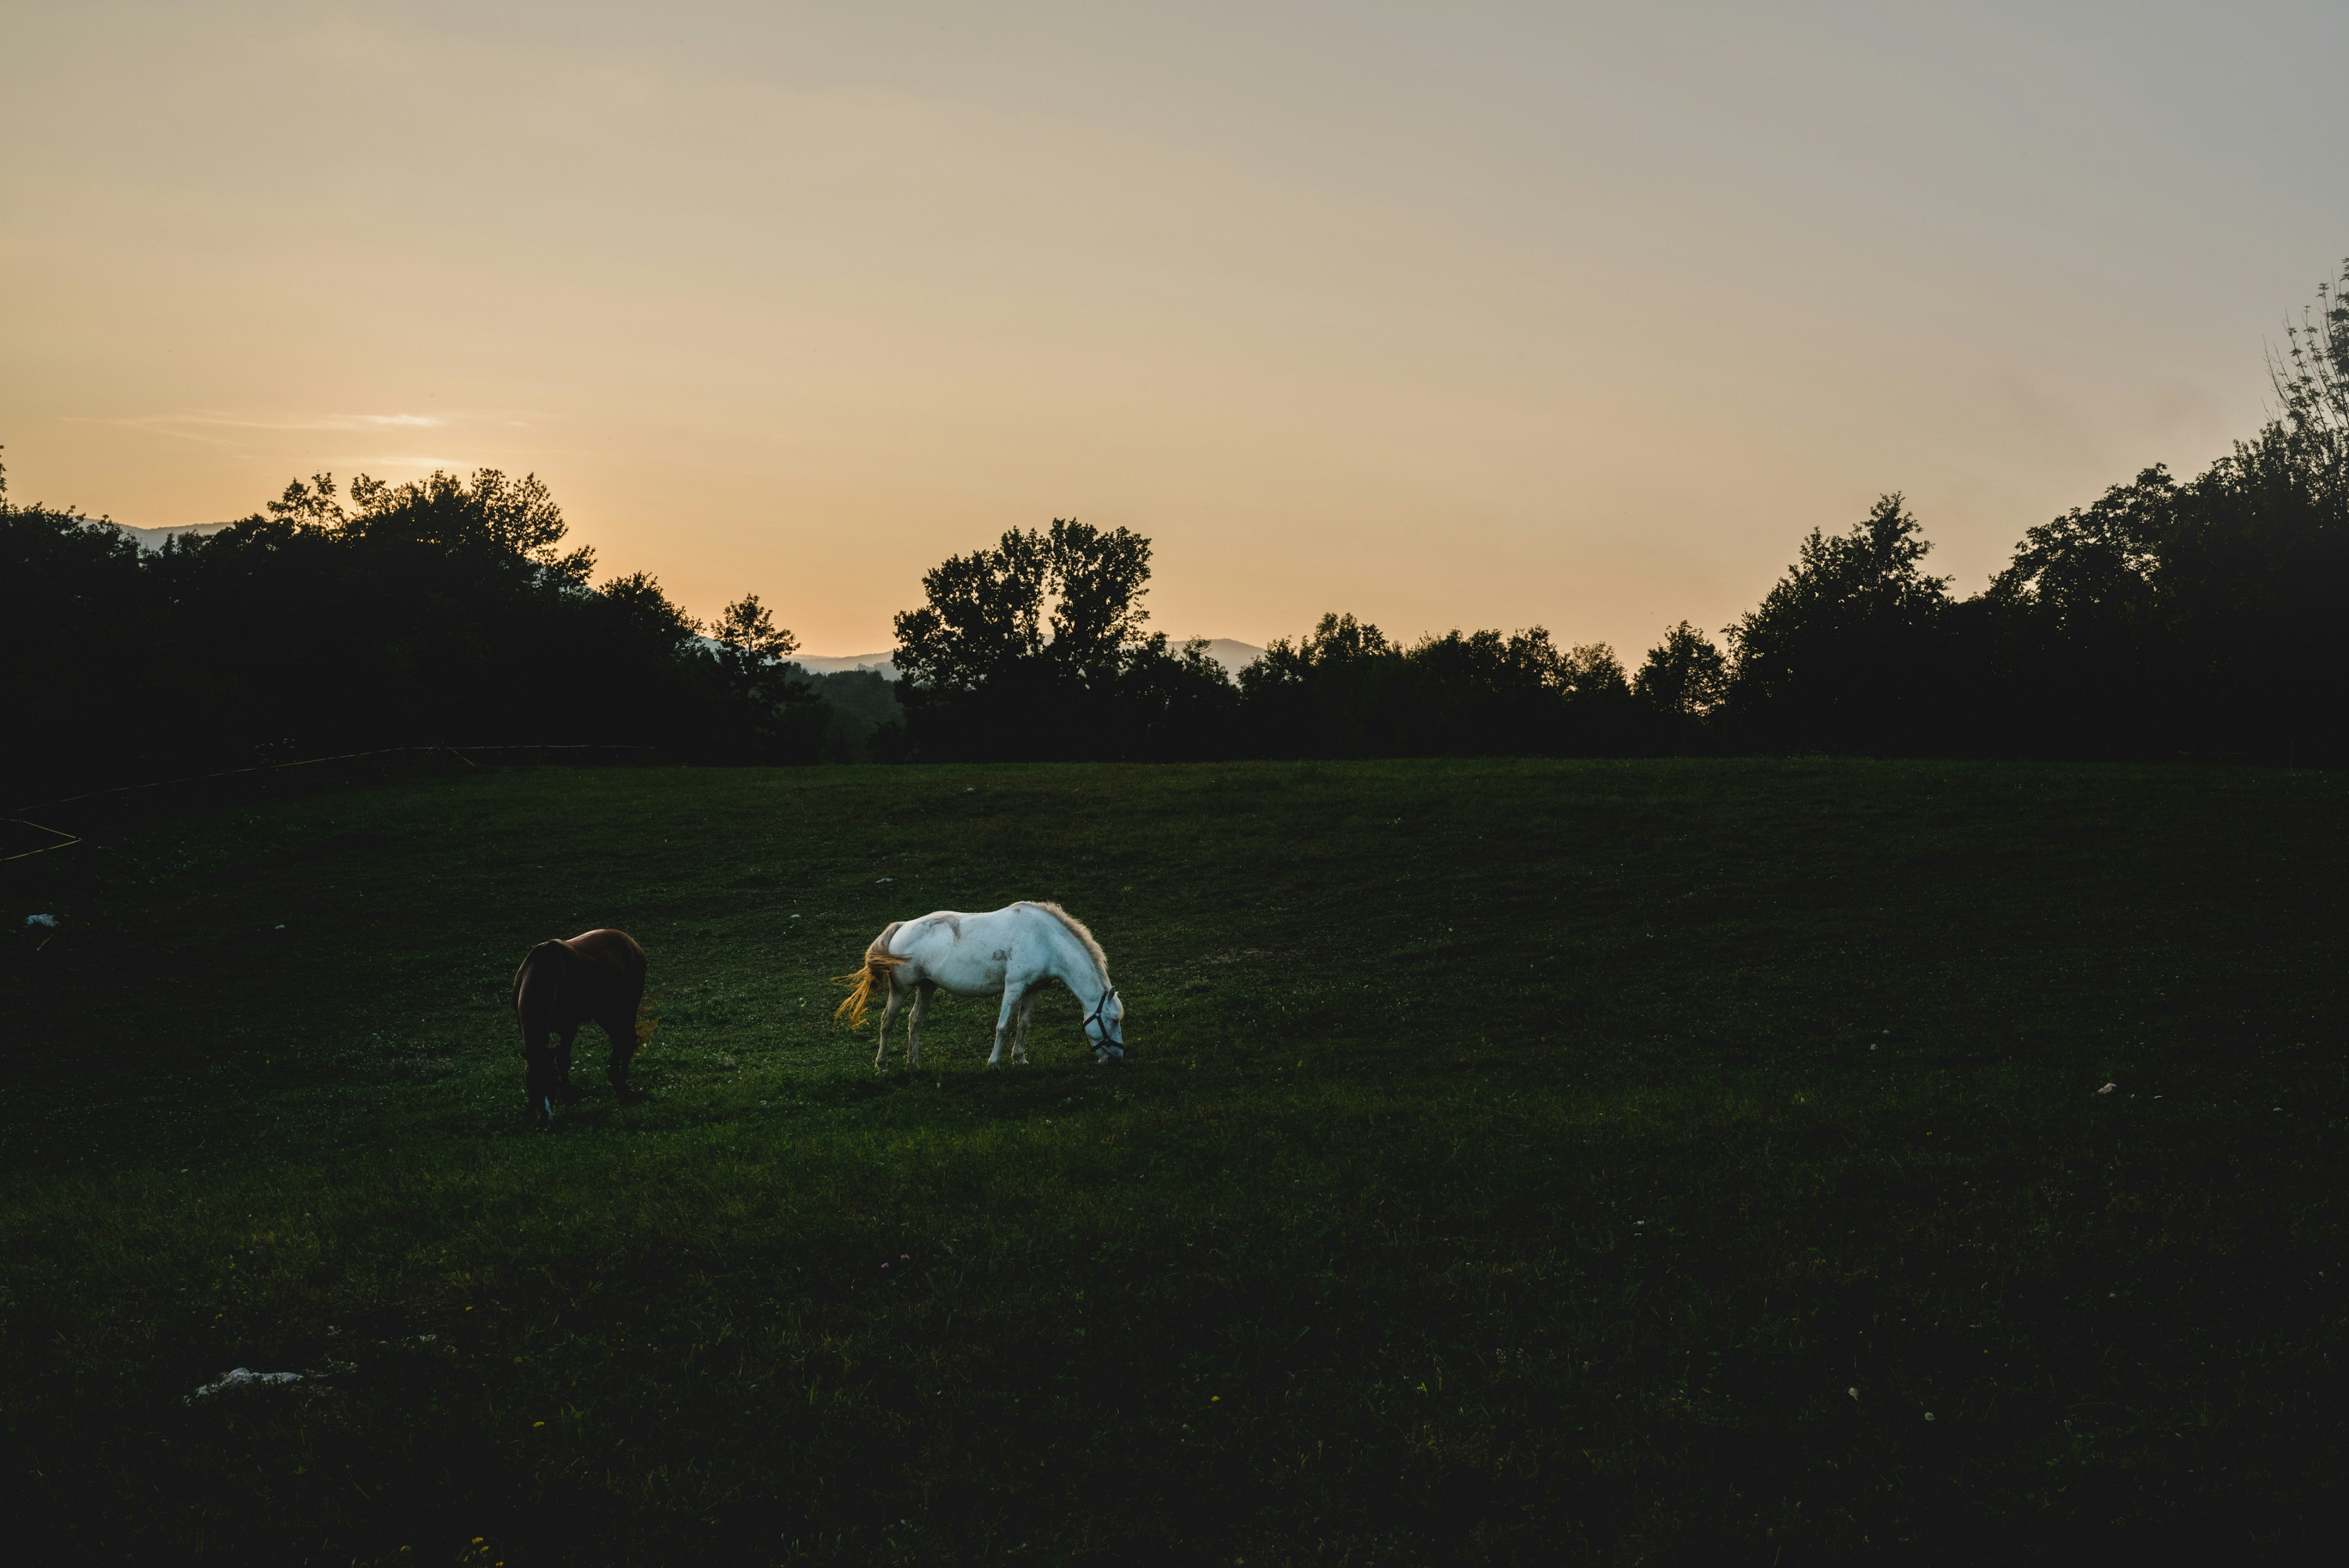 He decided to visit this beautiful animal park near Plitvice lakes because we knew hat there will be dears and many more animals. The last thing we saw was this two horses while they were grazing during this gorgeous sunset.